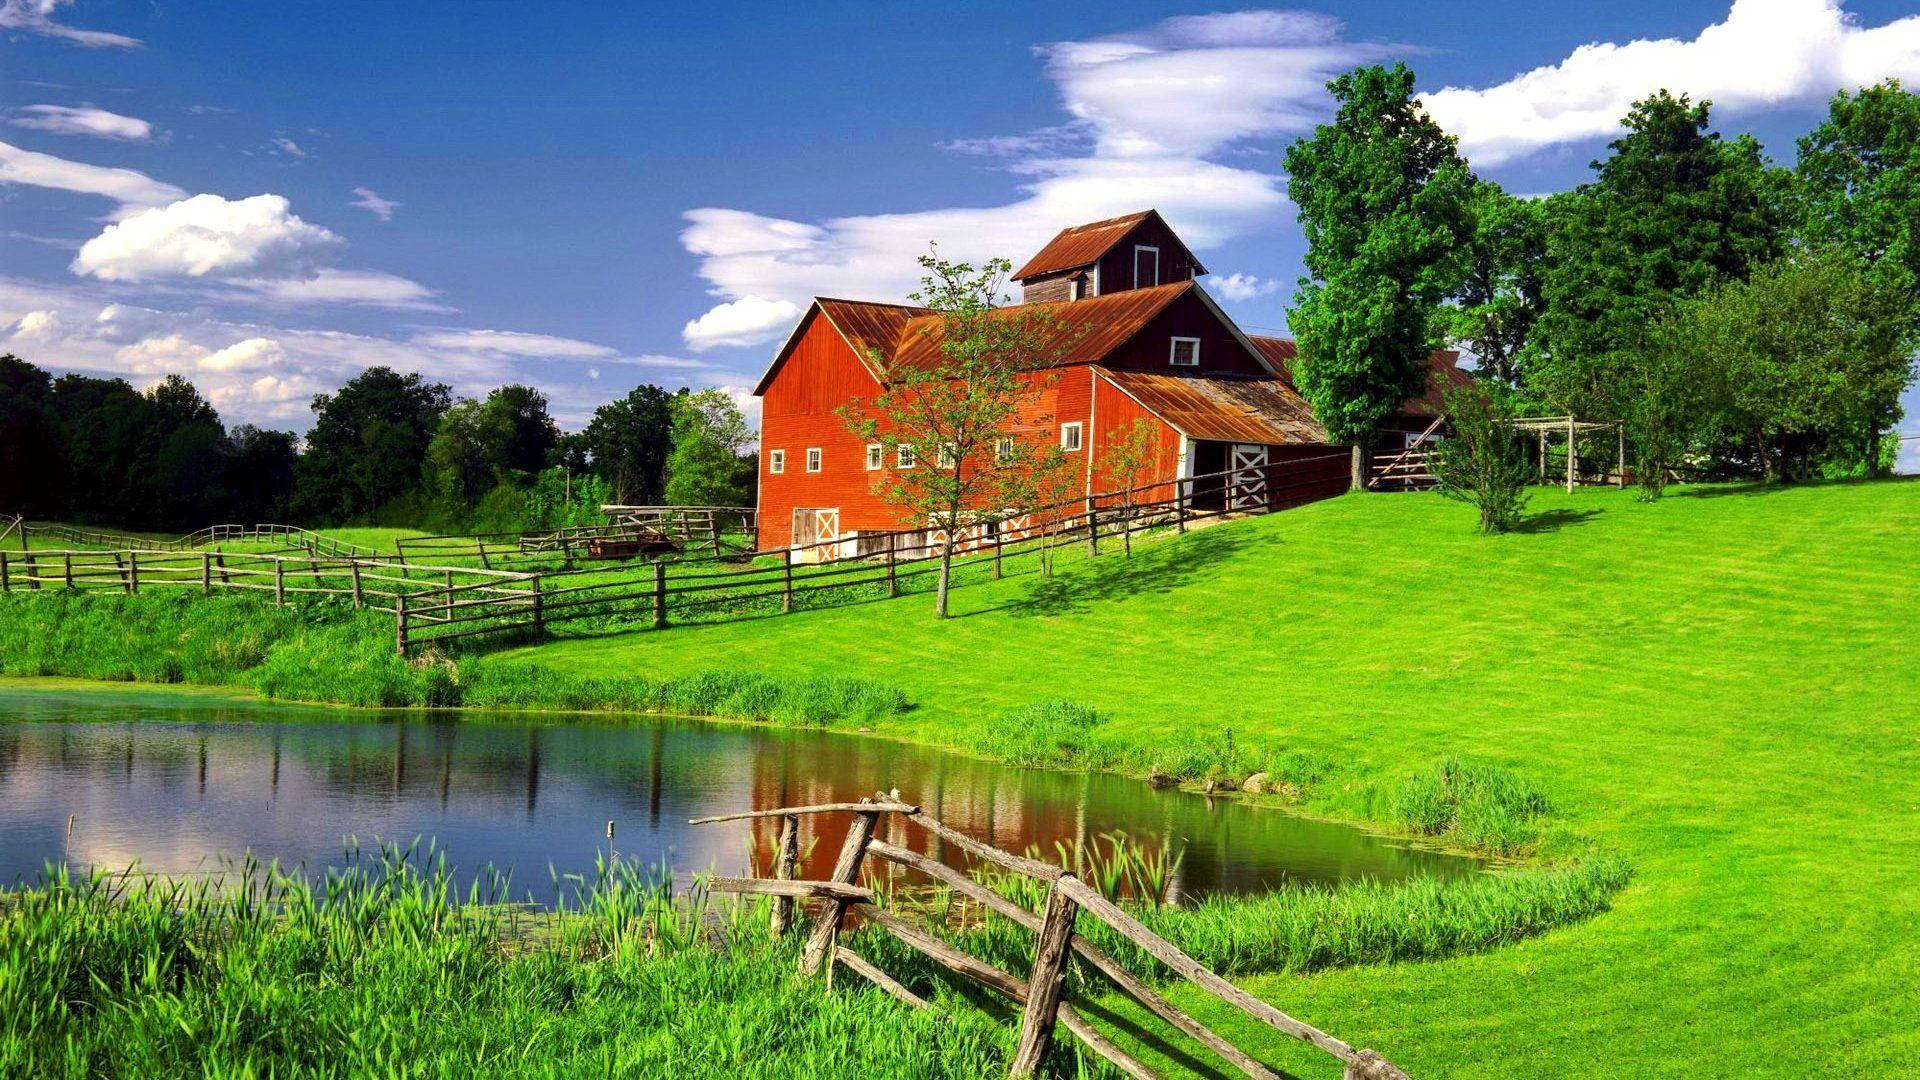 Farmhouse By The Pond Wallpaper